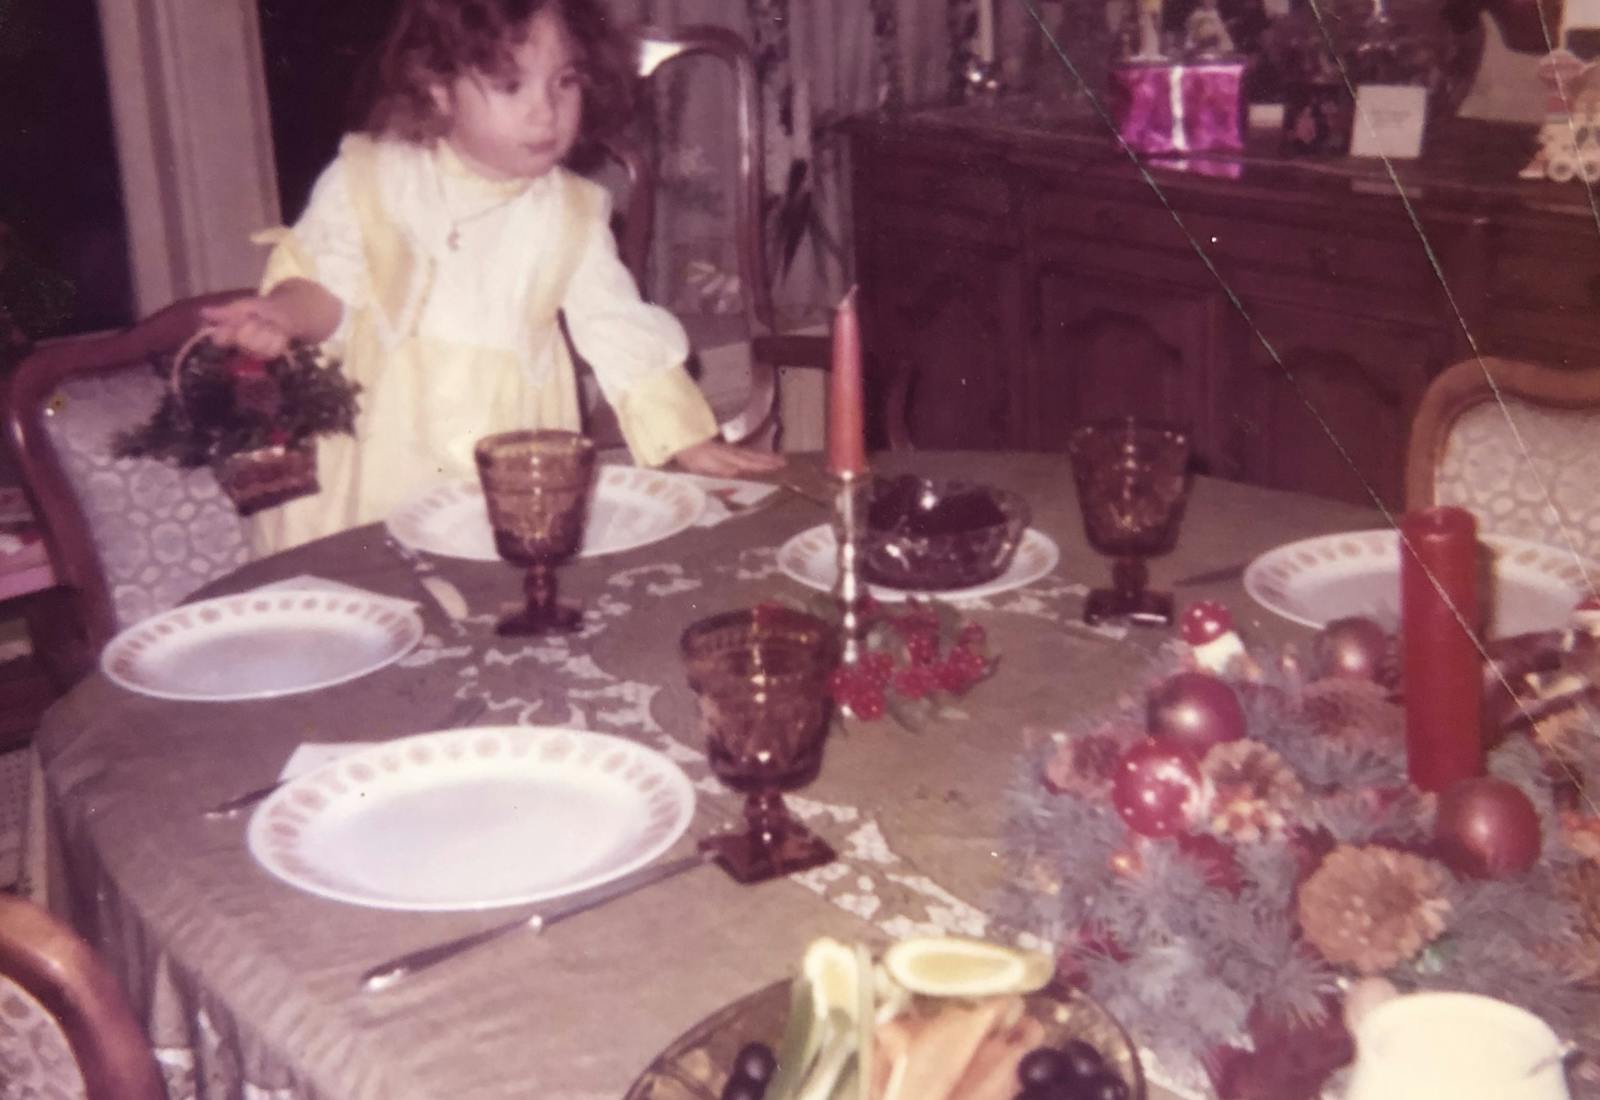 Young Frances standing by the dining table set with dinner plates and glassware.